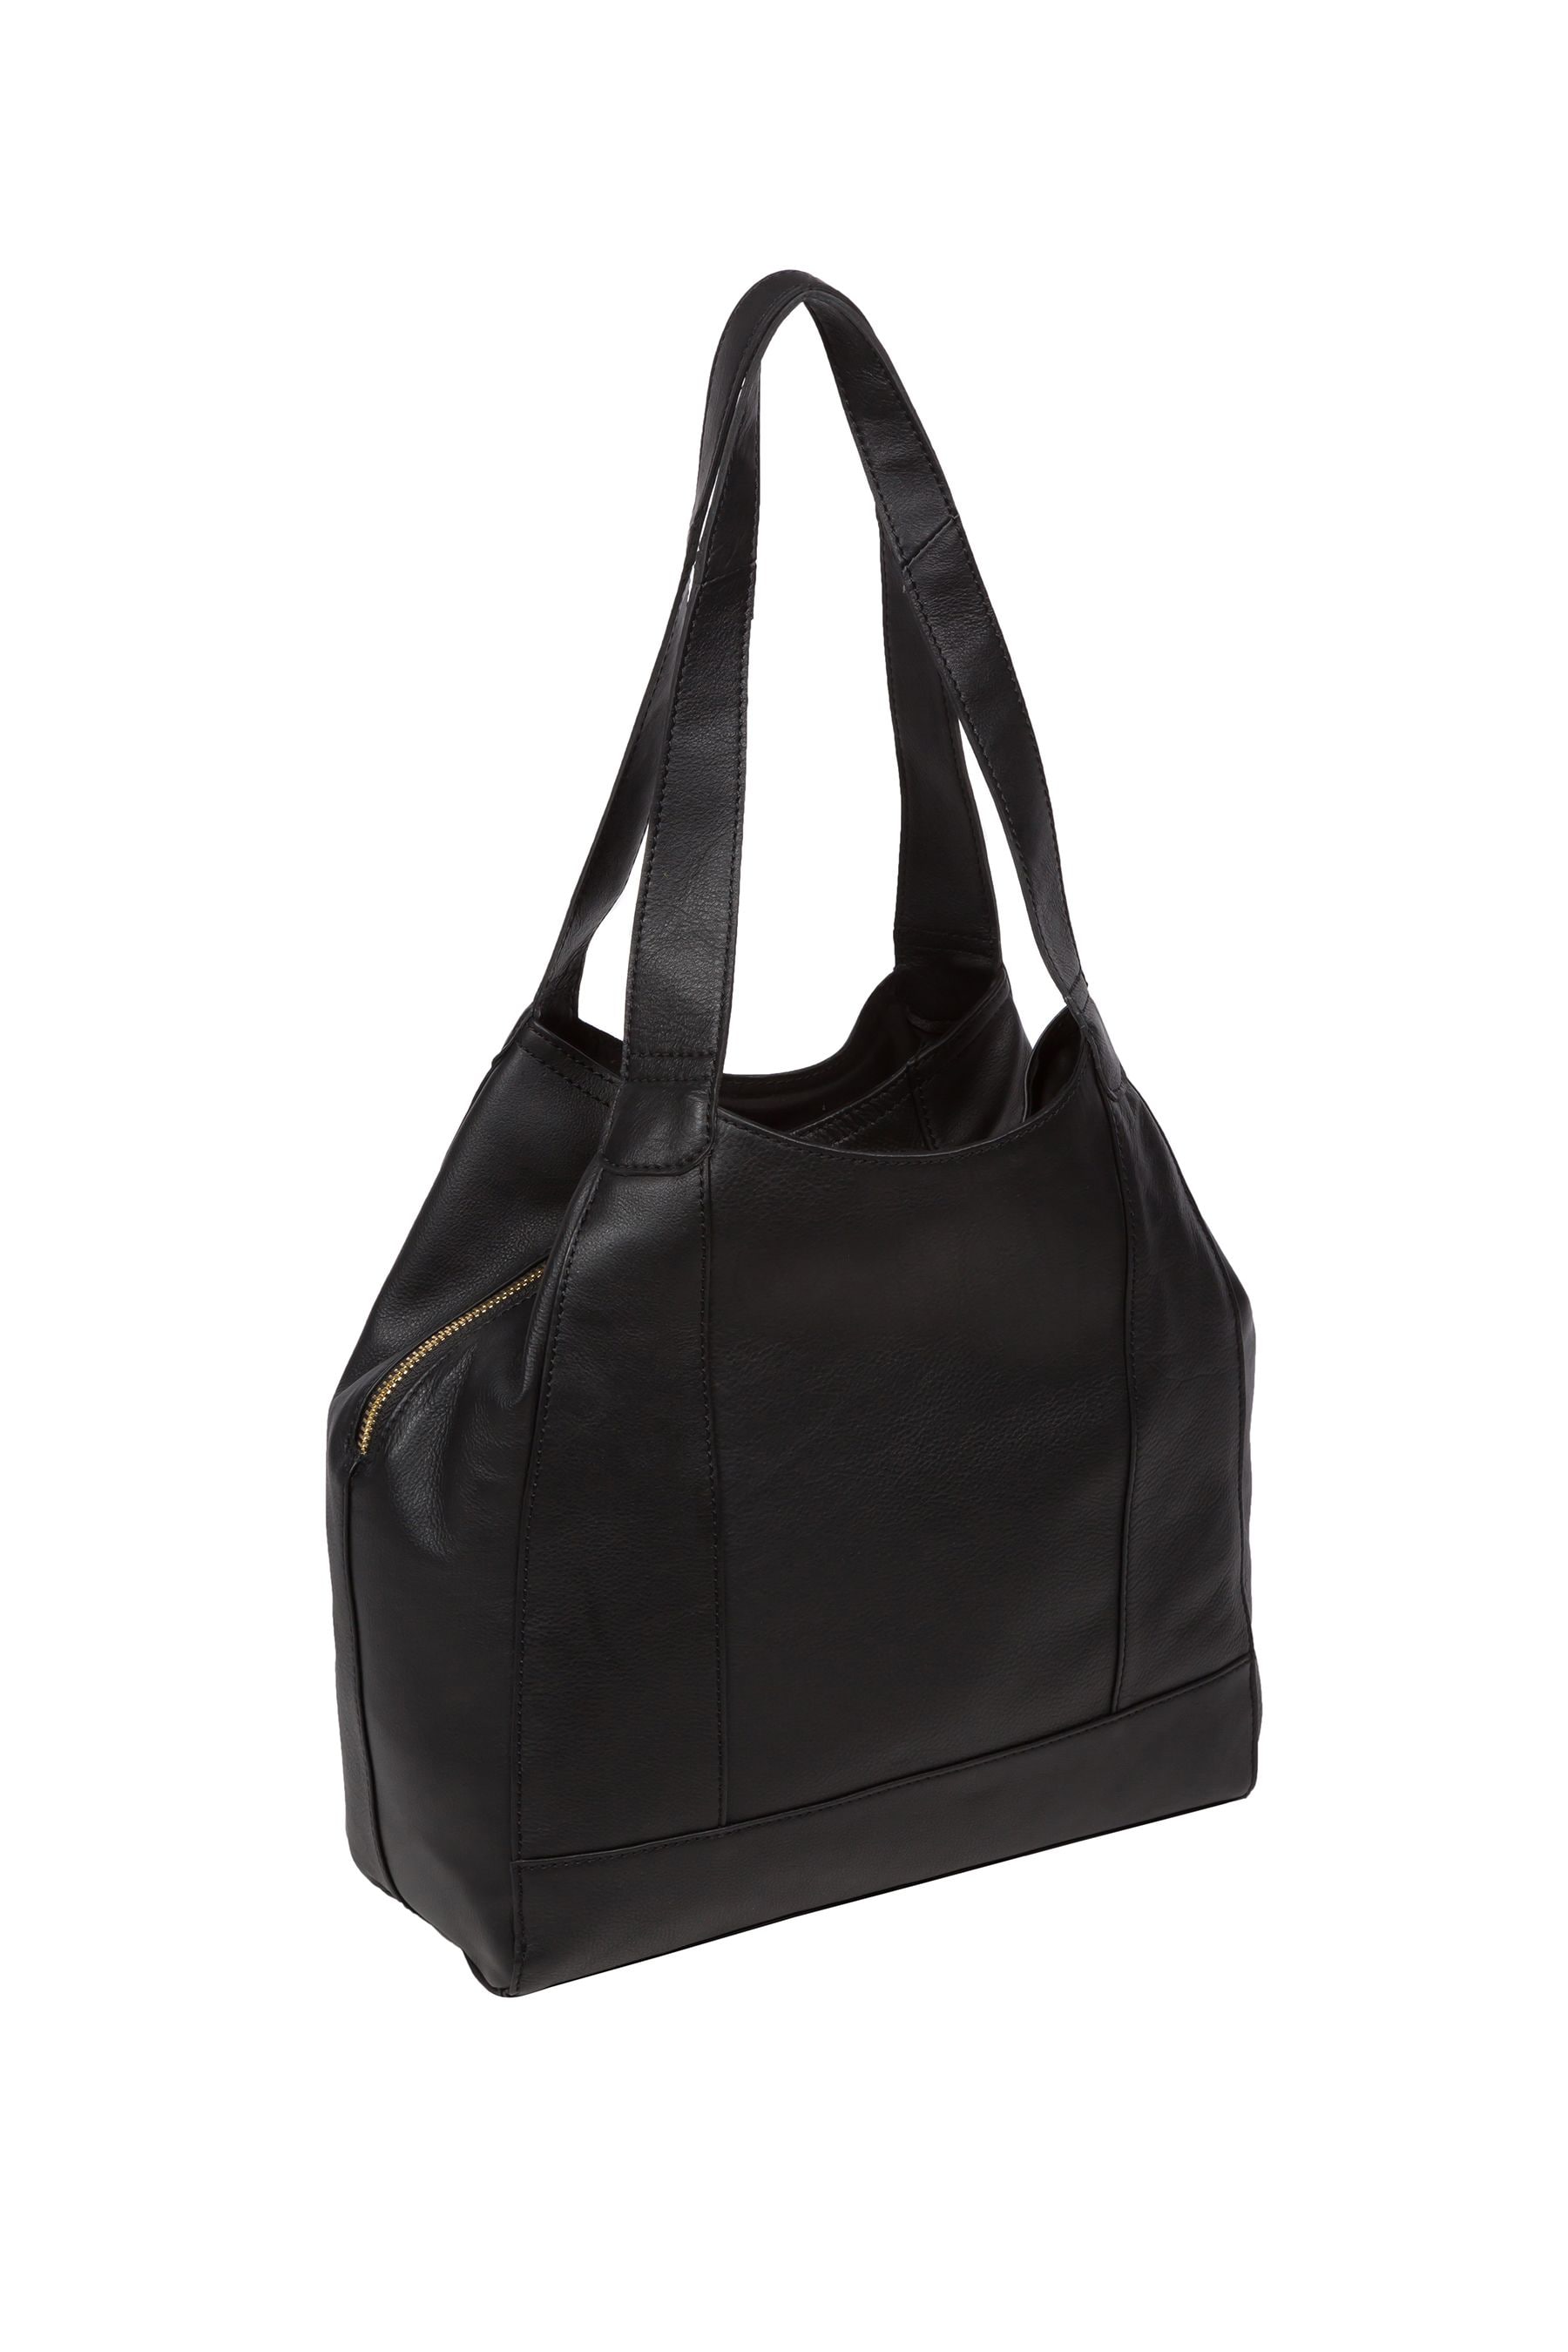 Buy Pure Luxuries London Colette Leather Handbag from the Next UK ...